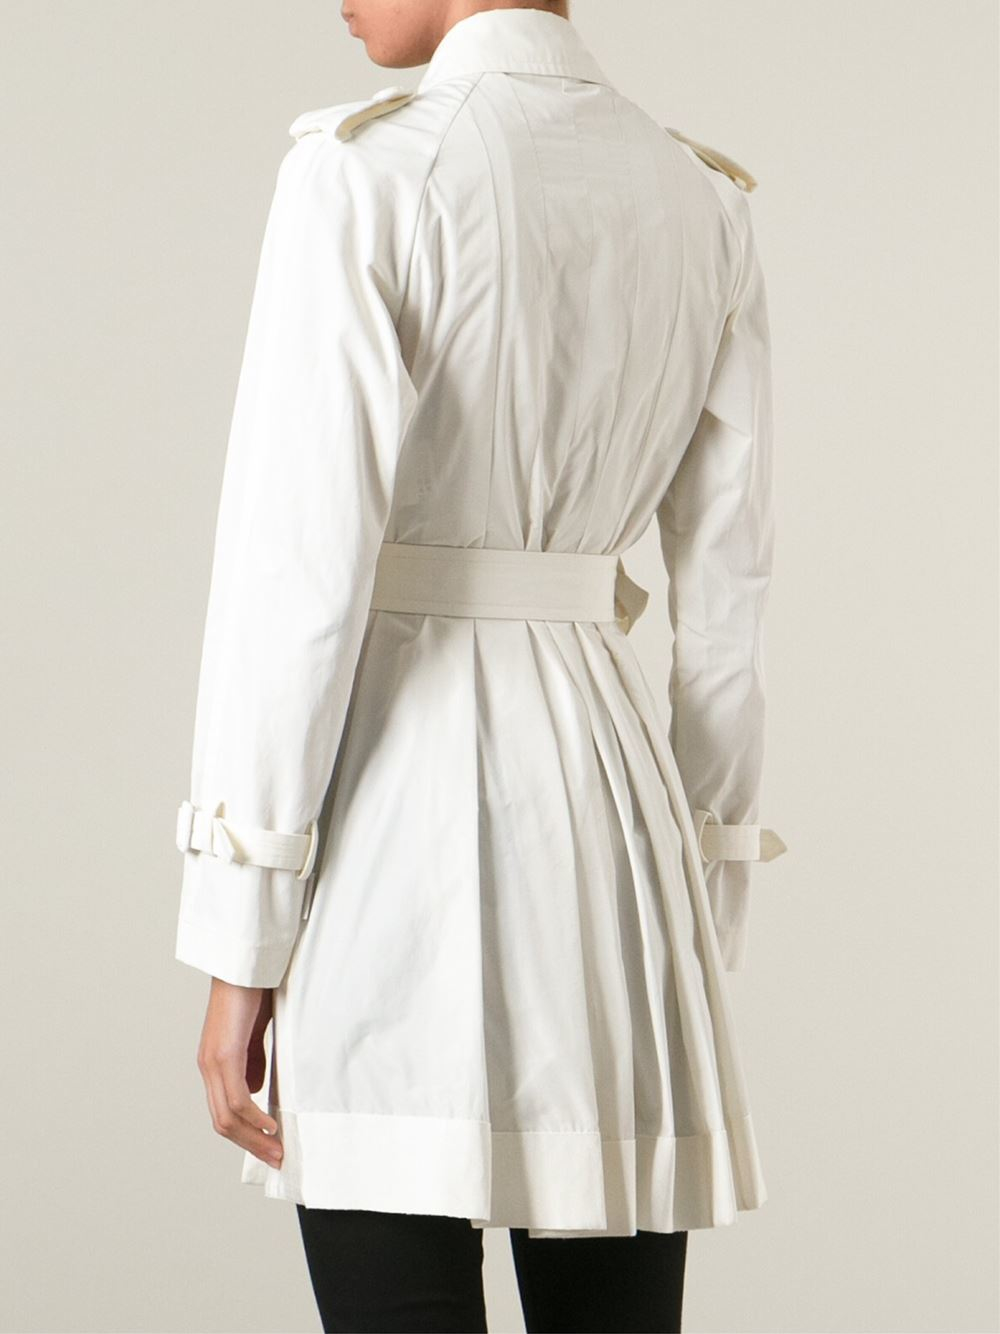 Lyst - Moncler Belted Trench Coat in White